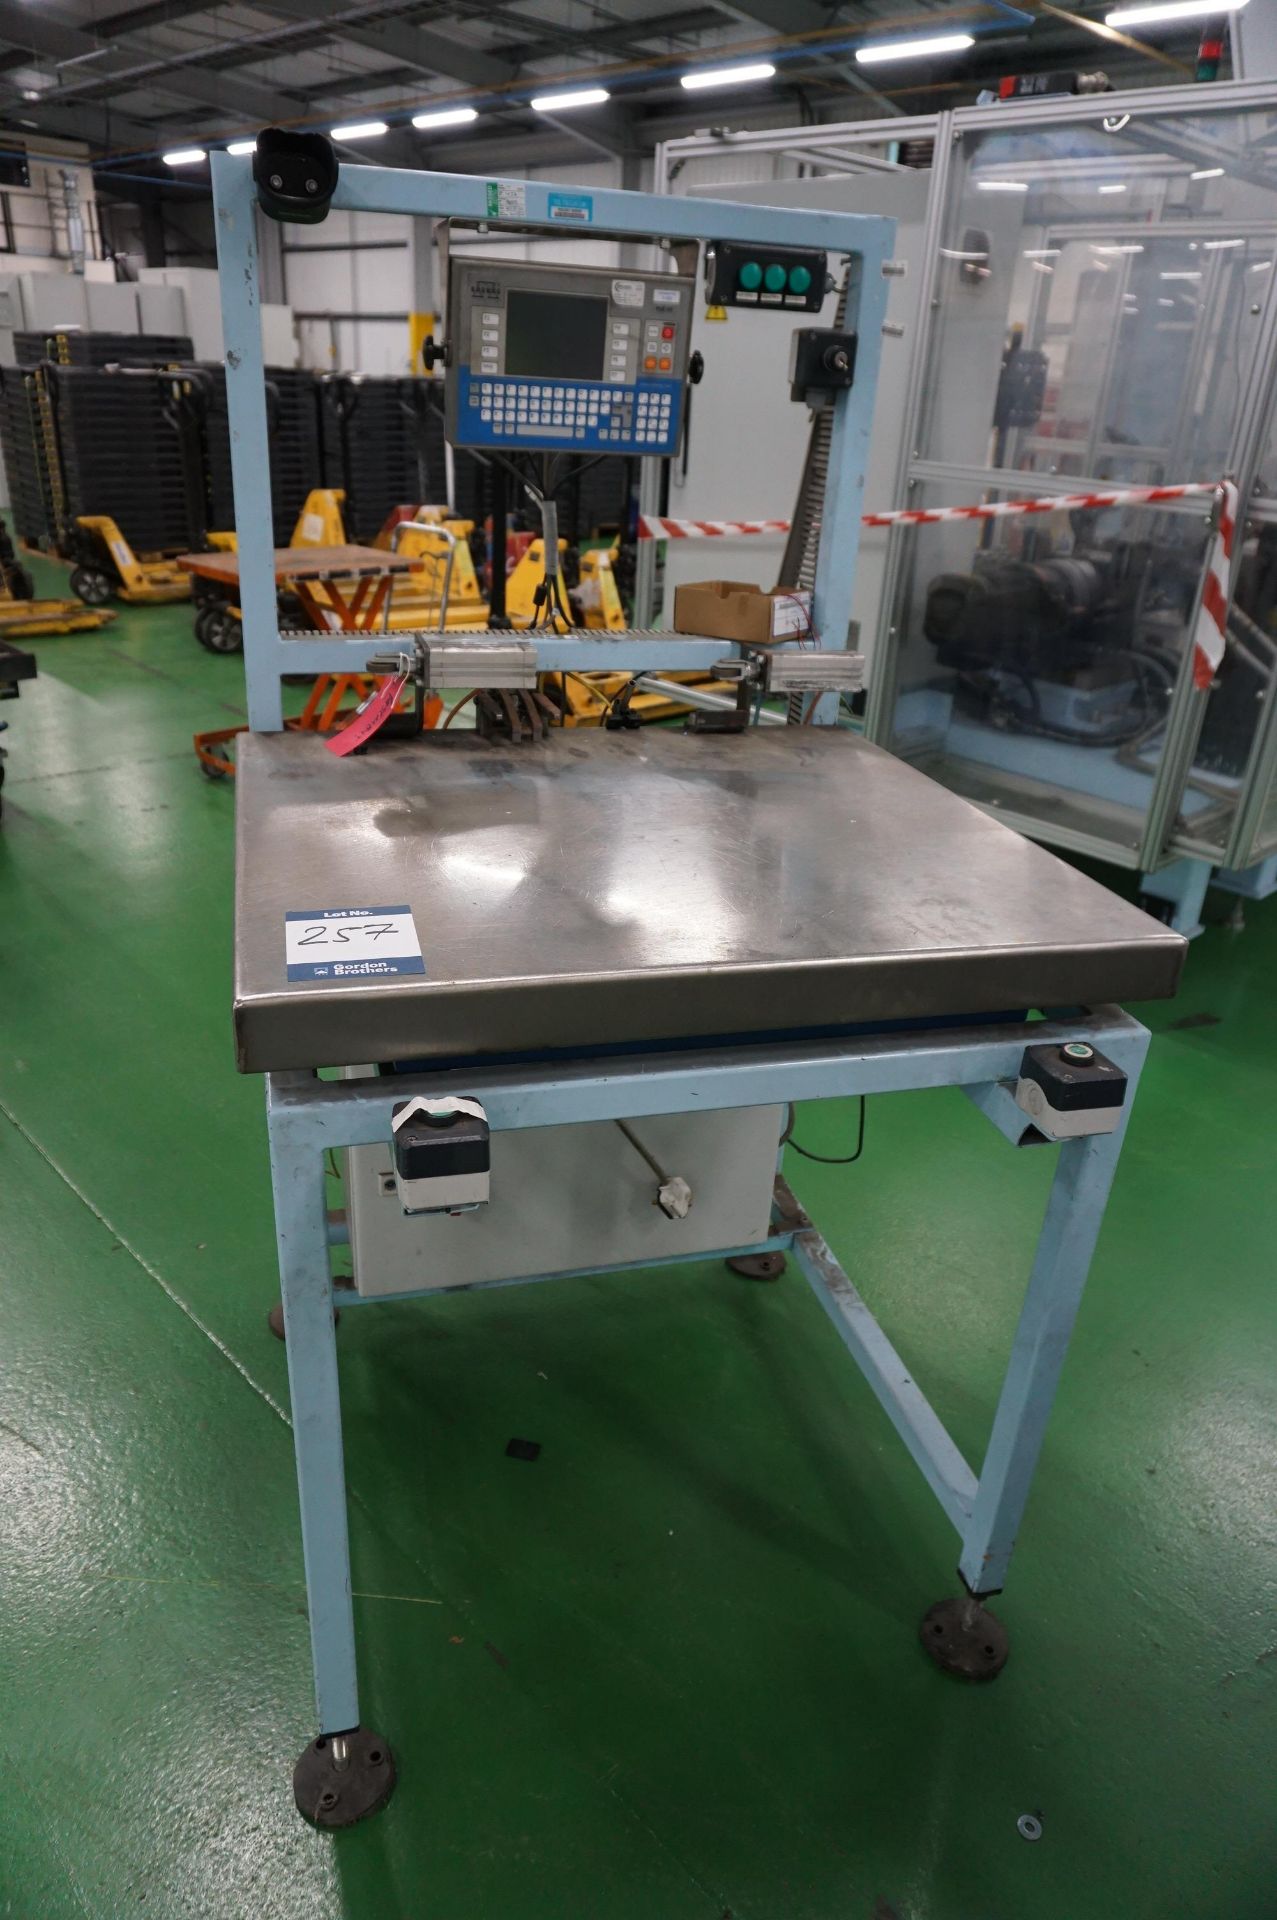 Radwag PUEHY digital scales with steel table weighing station and digital readout